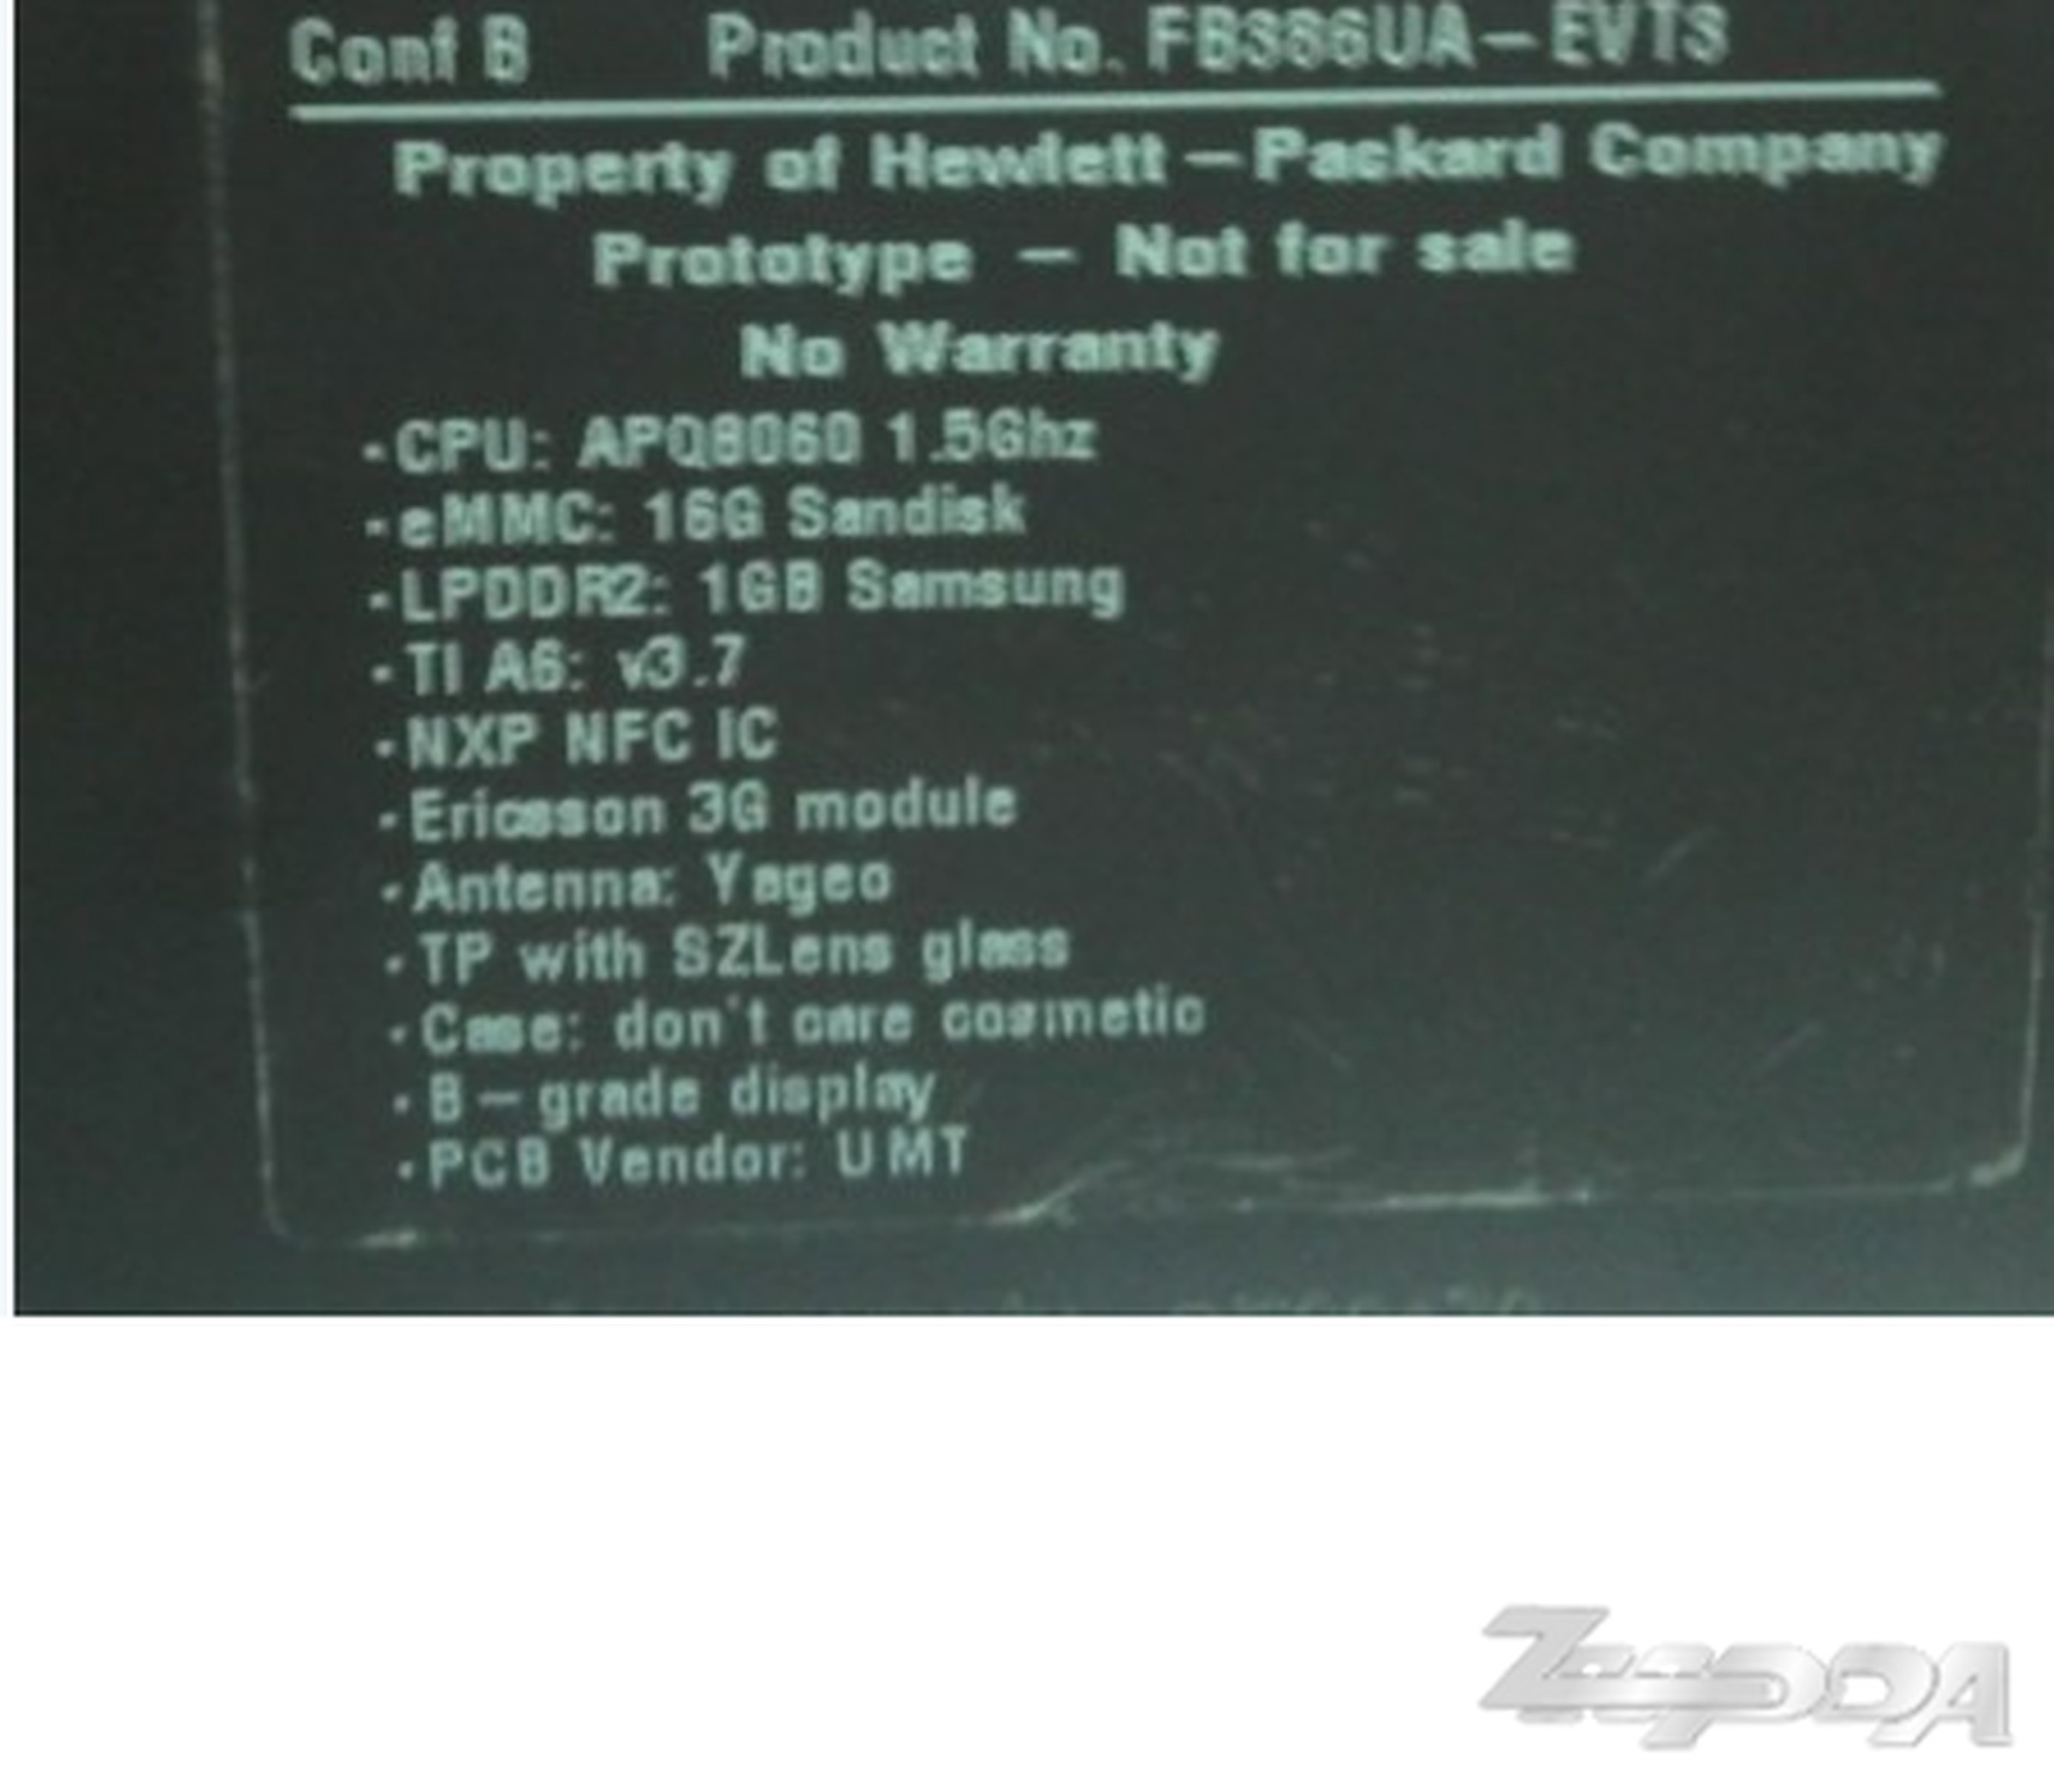 7-inch HP TouchPad leaks out